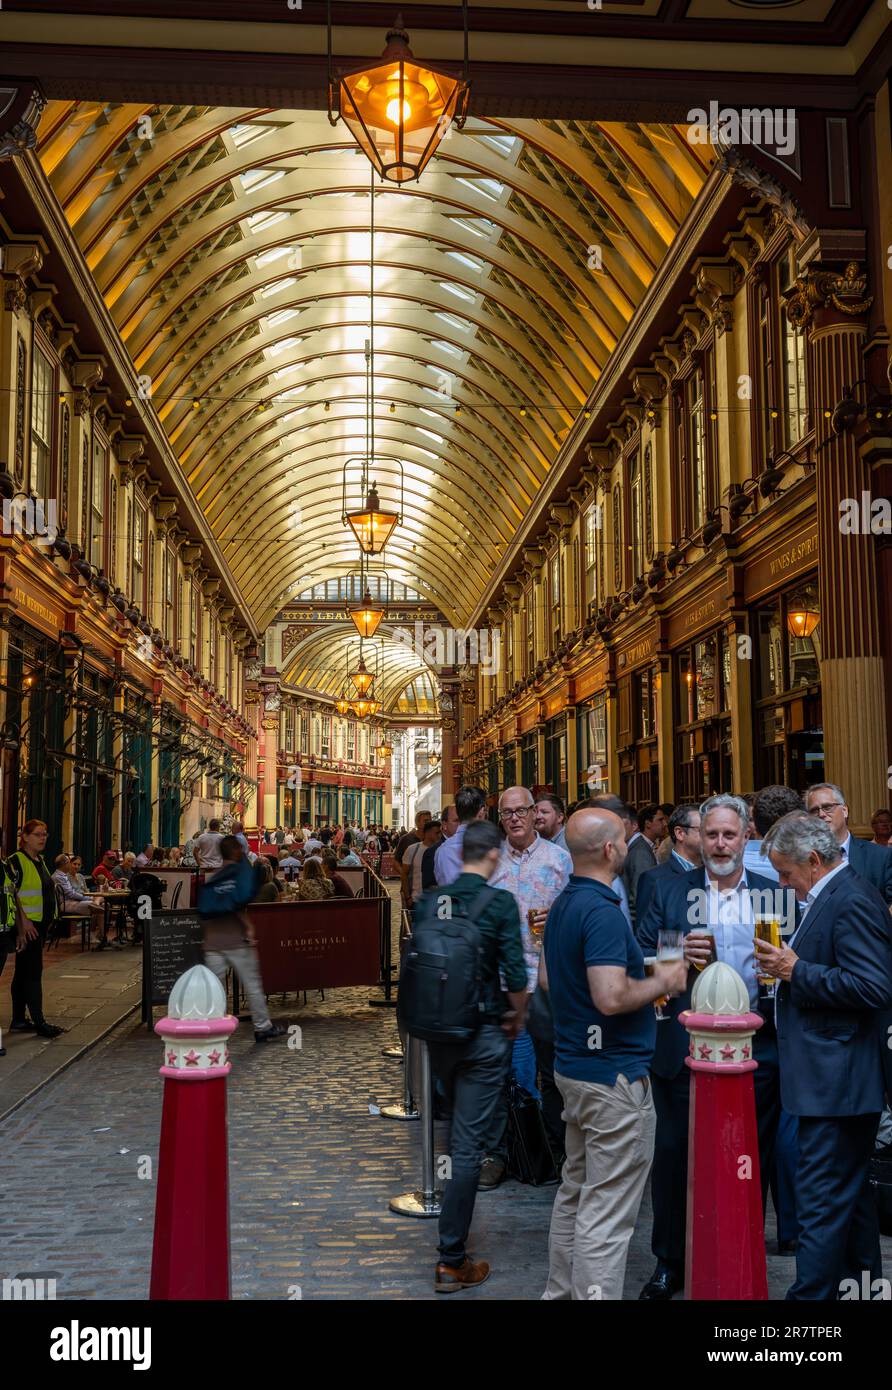 London, UK: The old Leadenhall Market in the City of London. People enjoy a drink on a summer's evening after work. Stock Photo